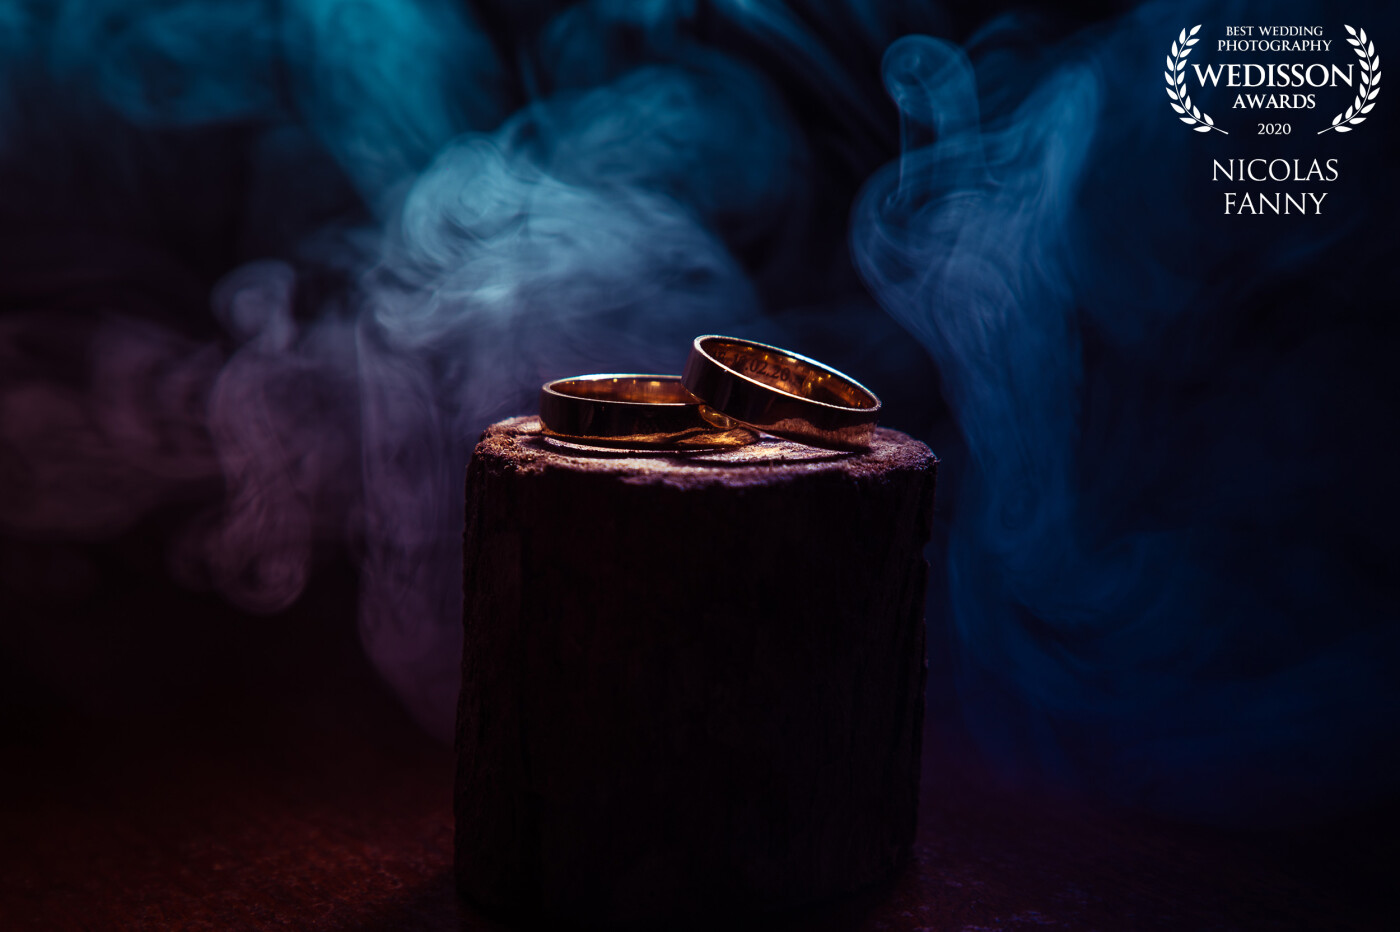 Shooting rings is often a sort of monotony. You find them at each wedding even though they are different. The challenge is to be able to have different compositions and ideas to bring to life this object which symbolizes lifetime commitment.